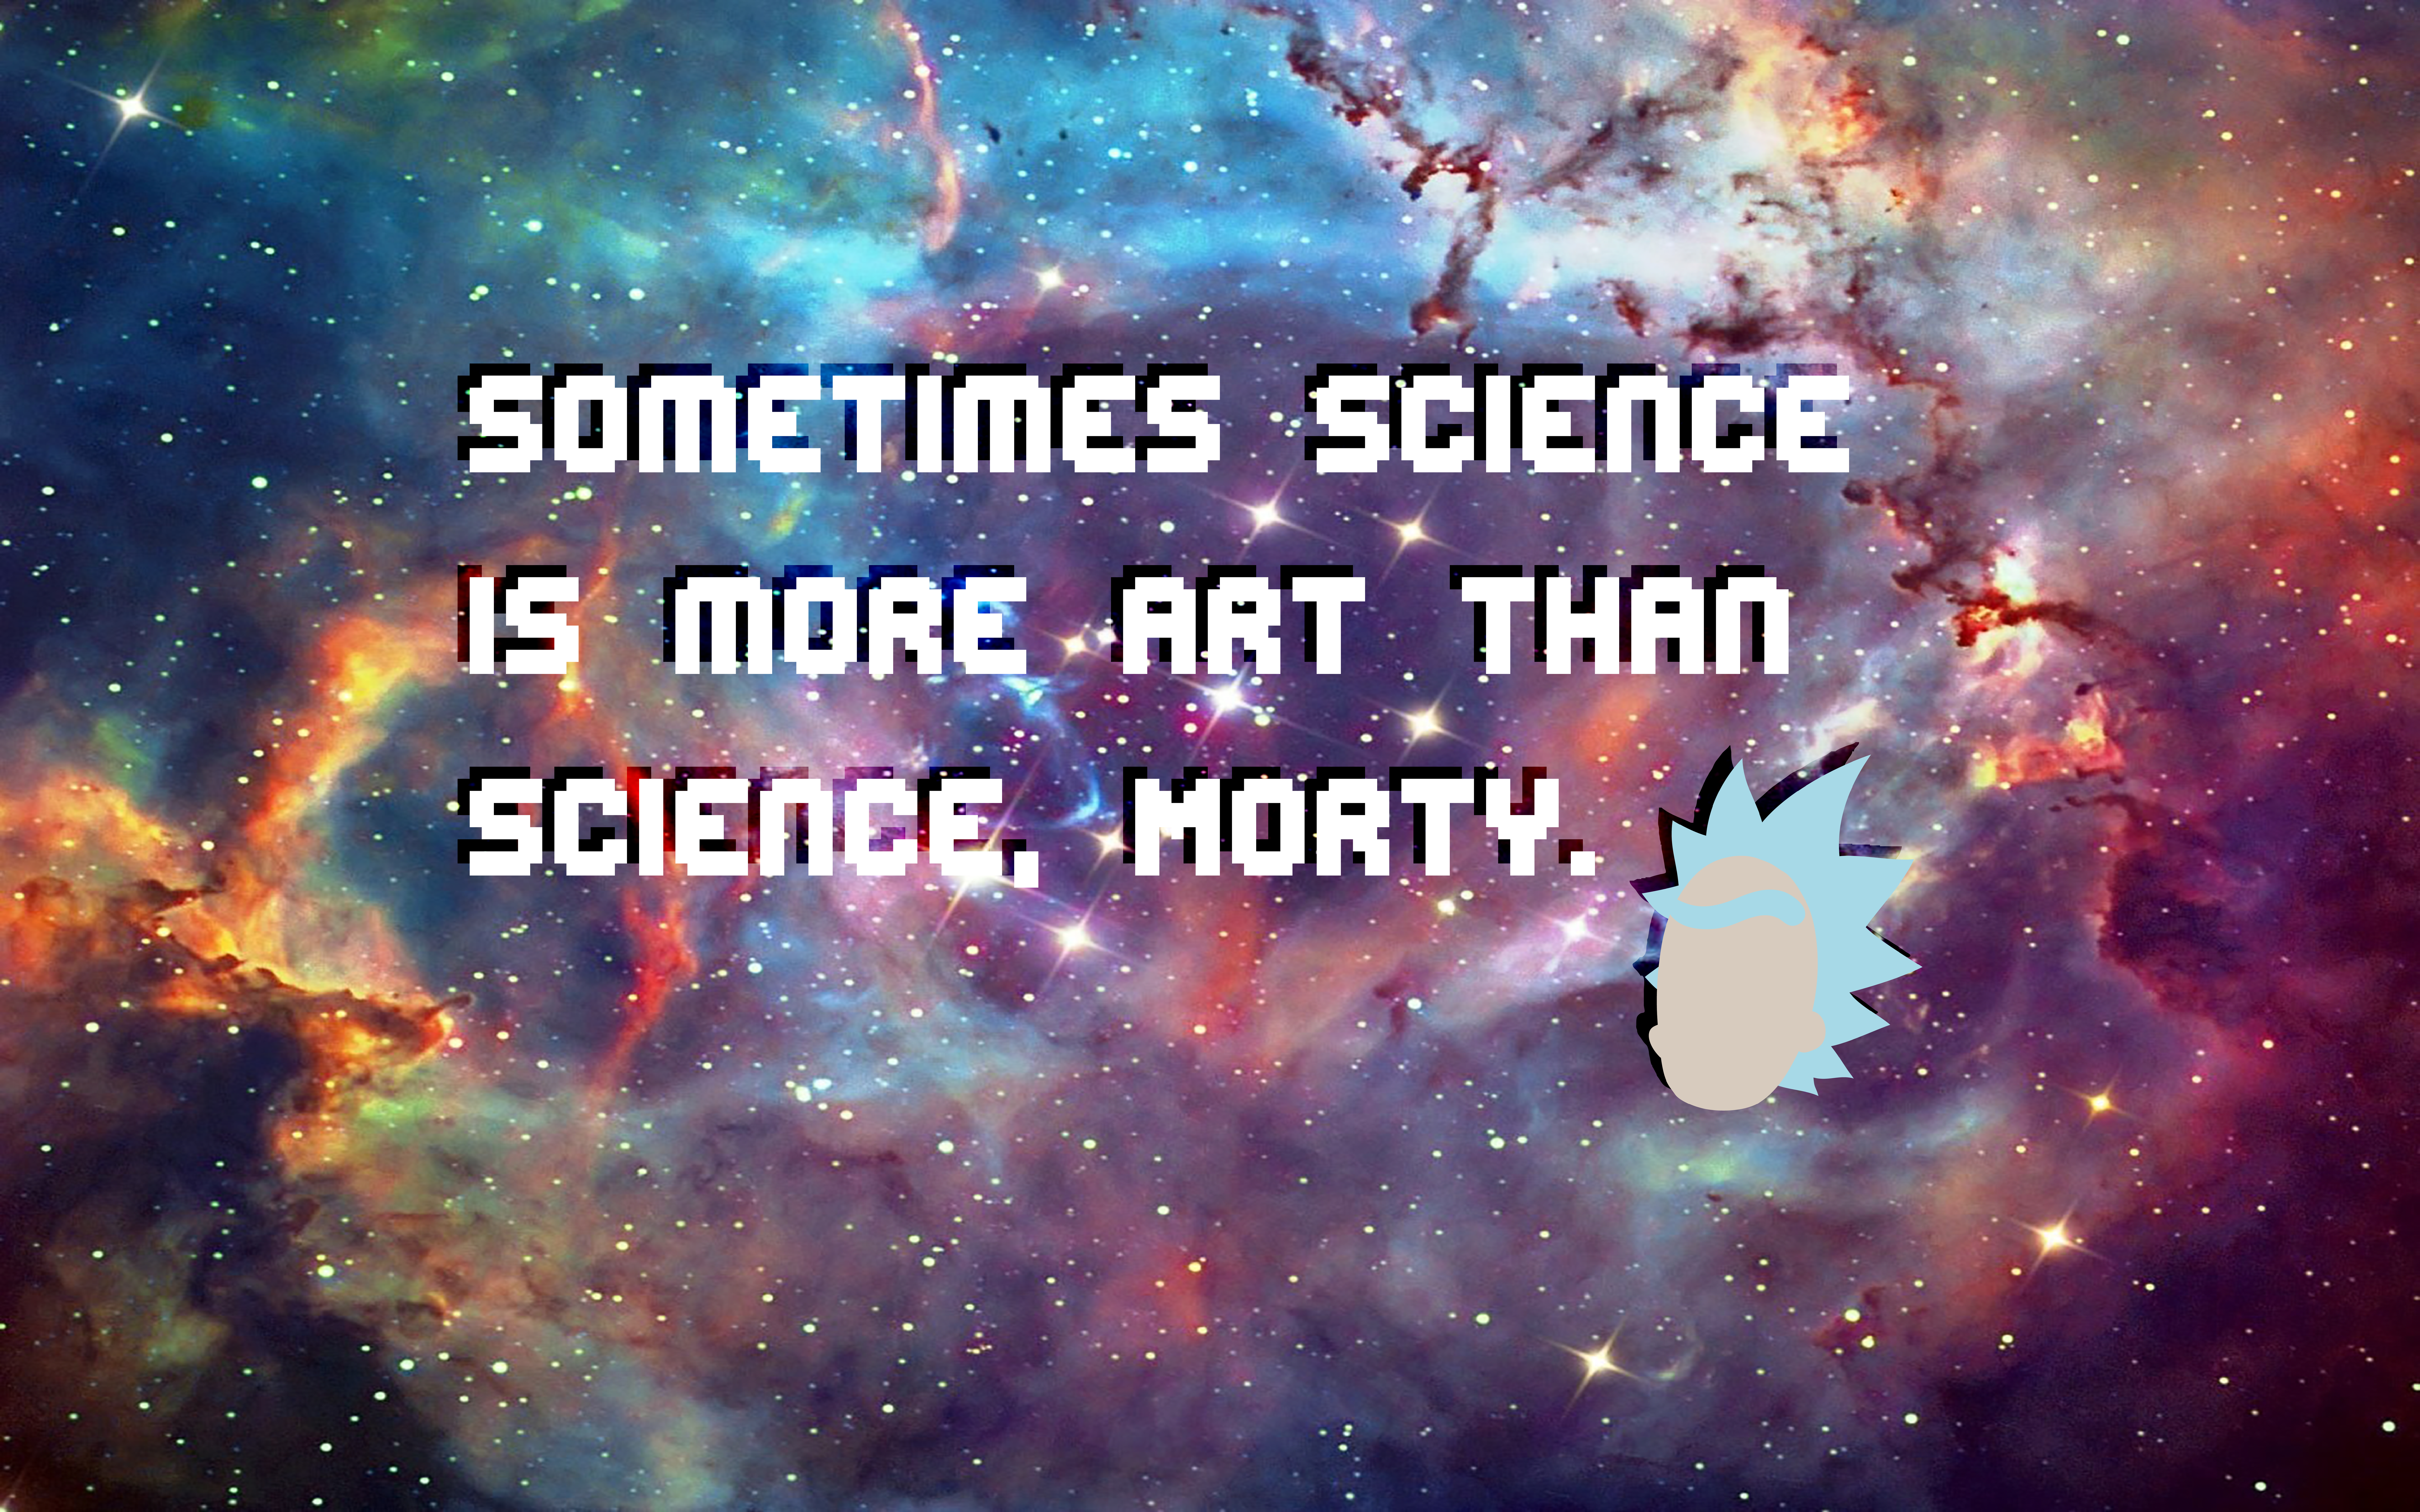 General 12000x7500 galaxy space science space art digital art Rick and Morty TV series Rick Sanchez stars face text